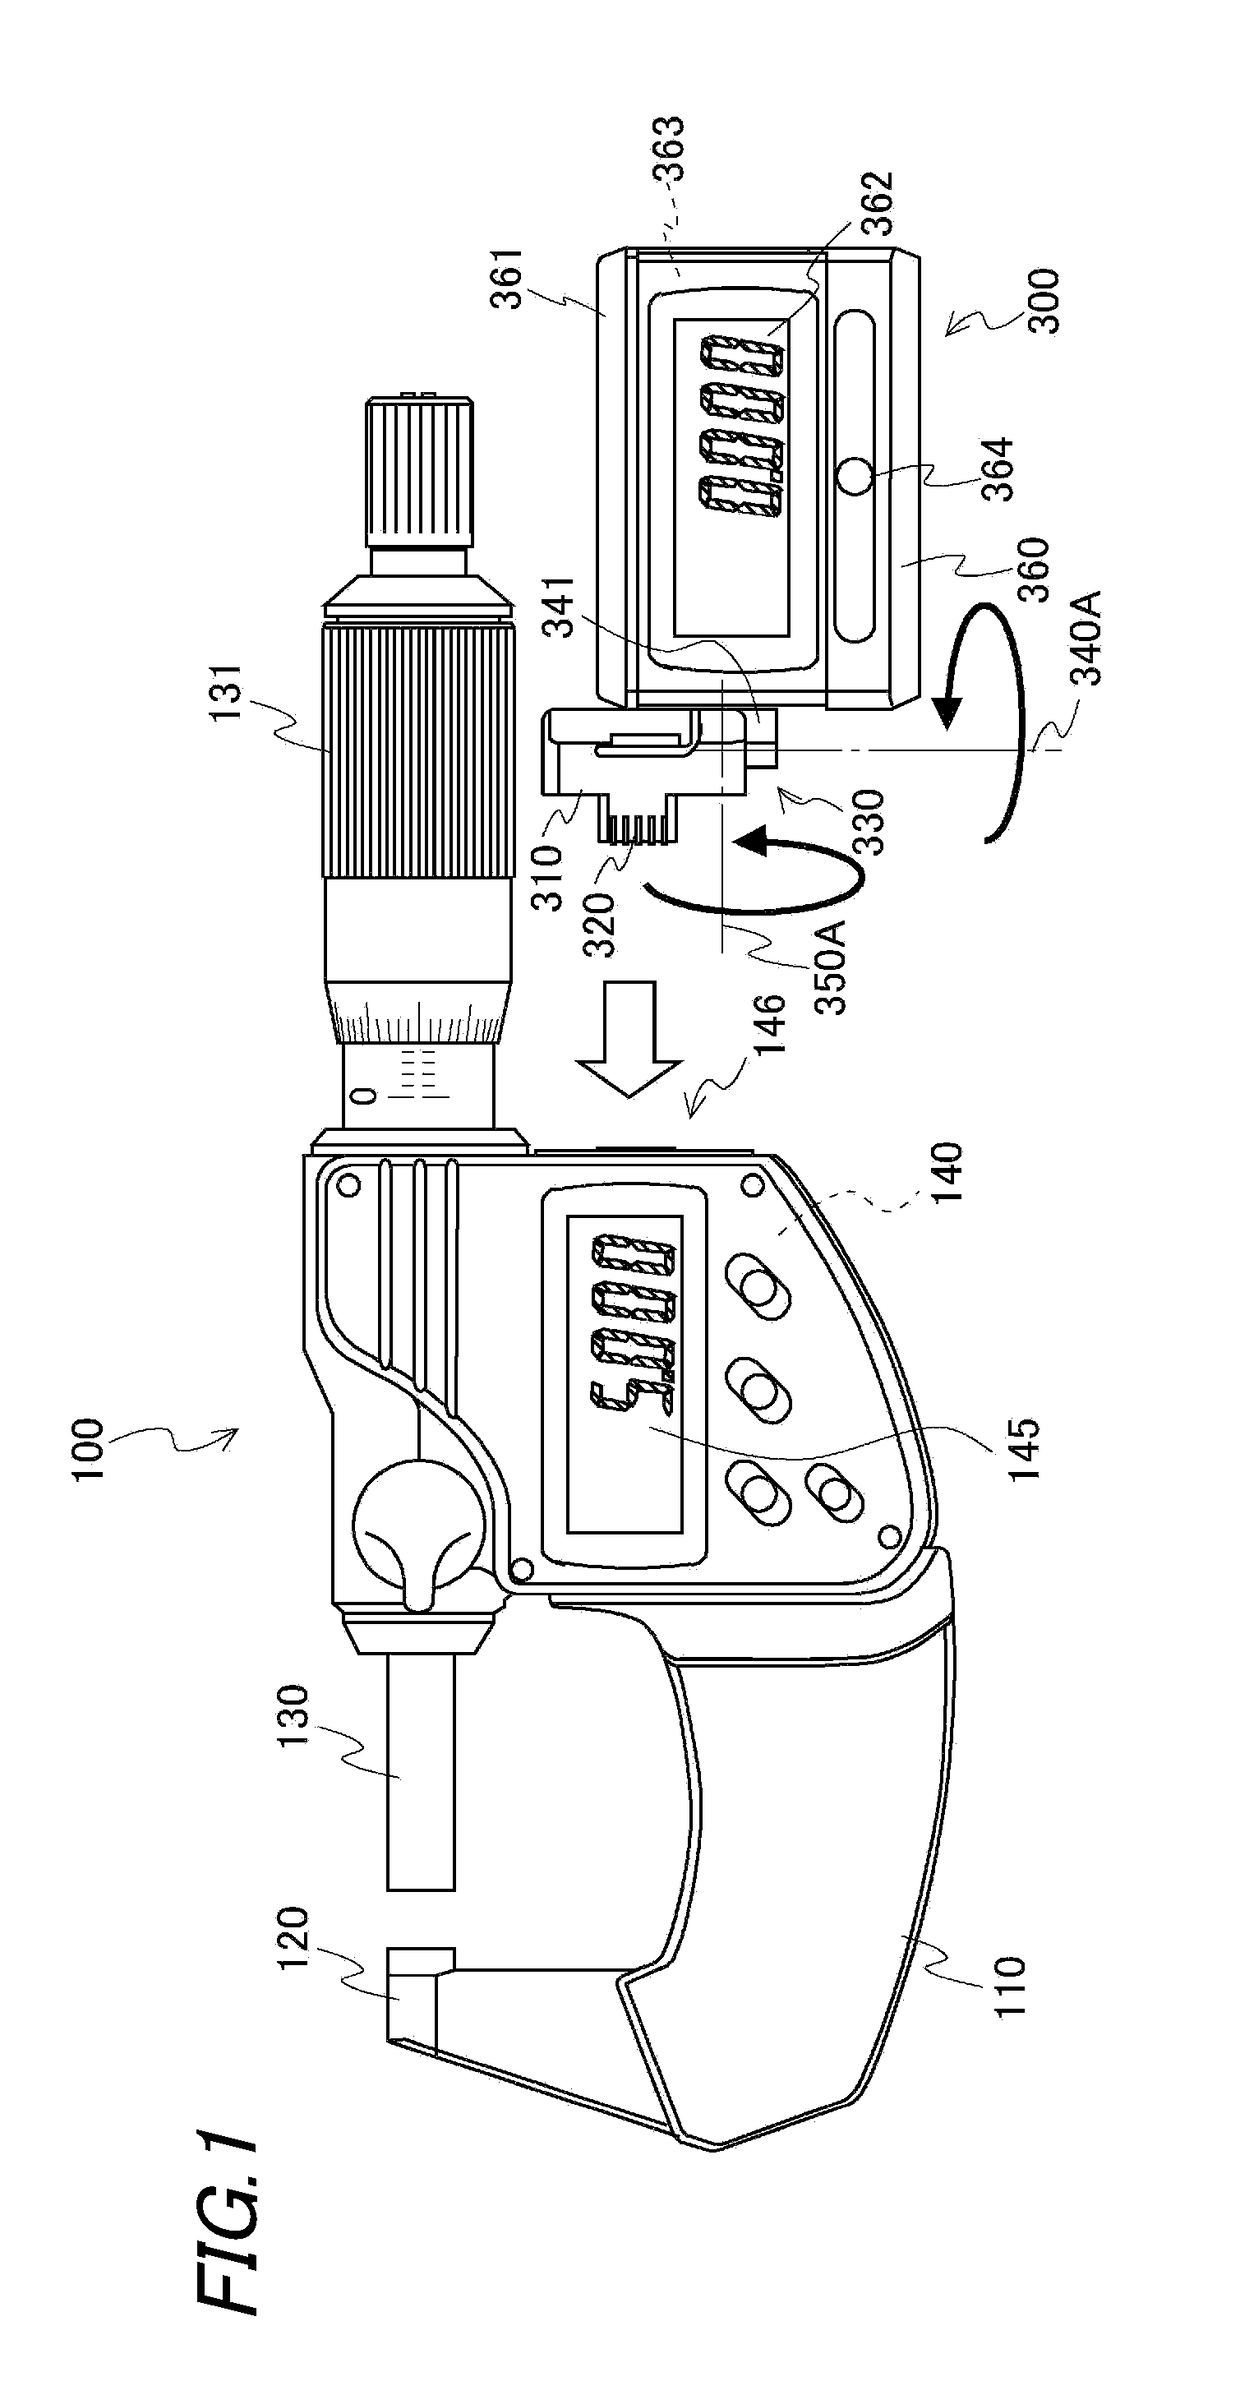 External device for measuring instrument